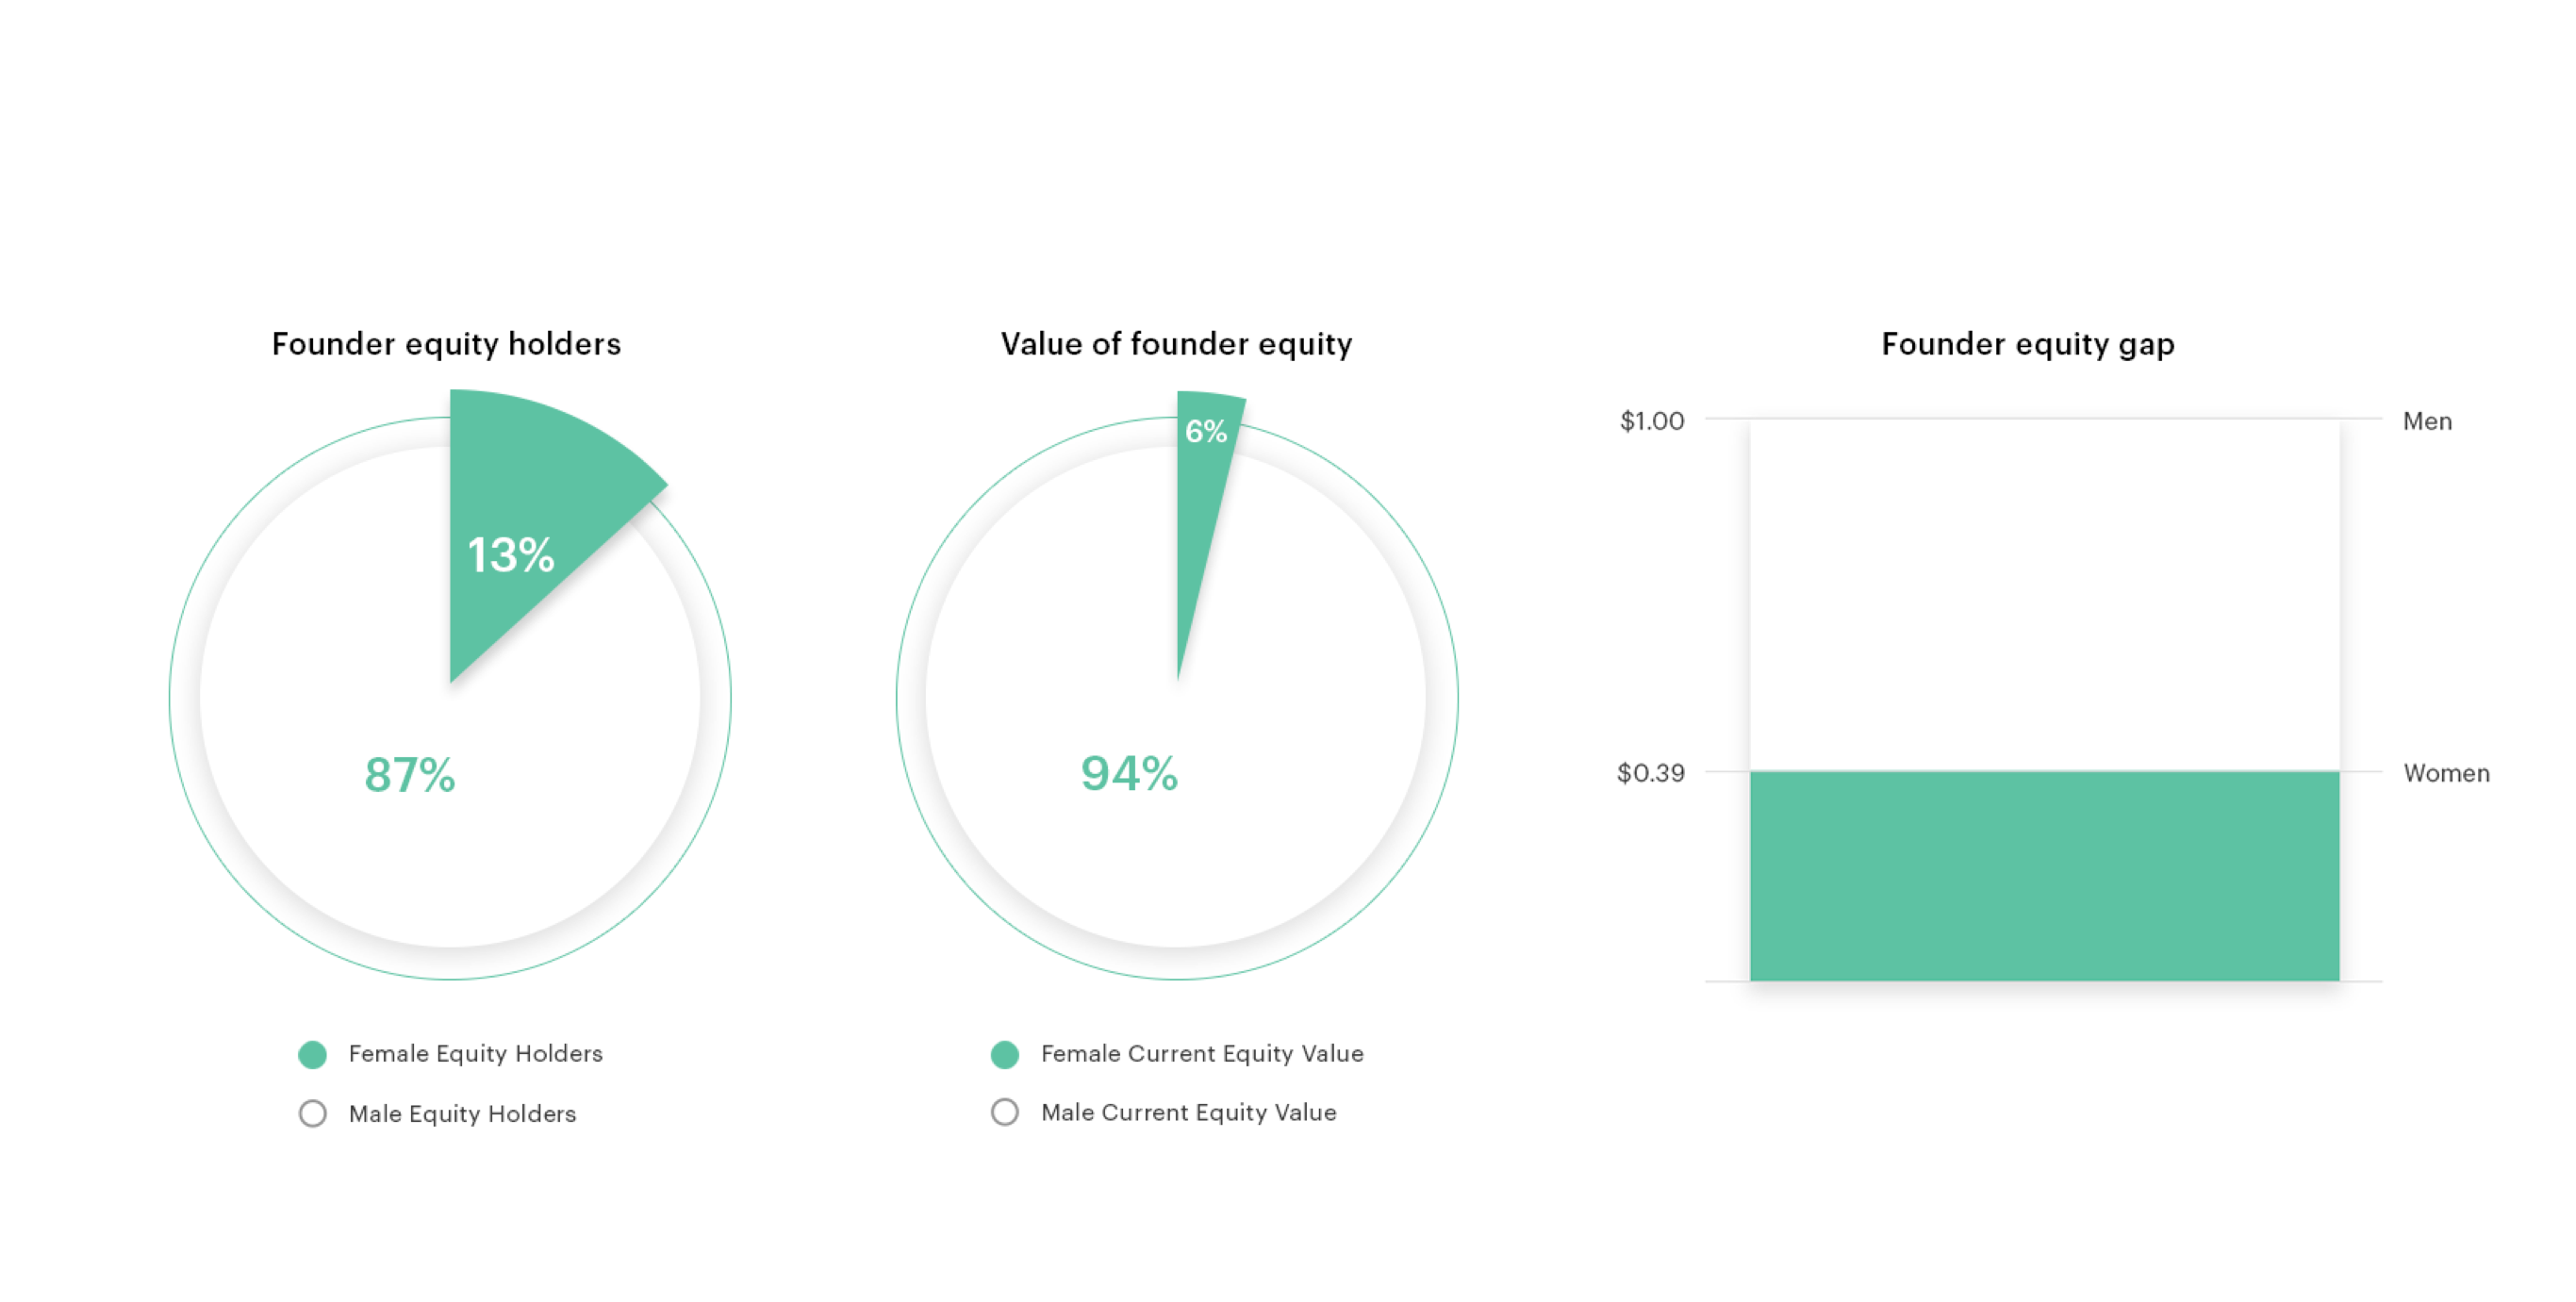 Analyzing the gender equity gap 3